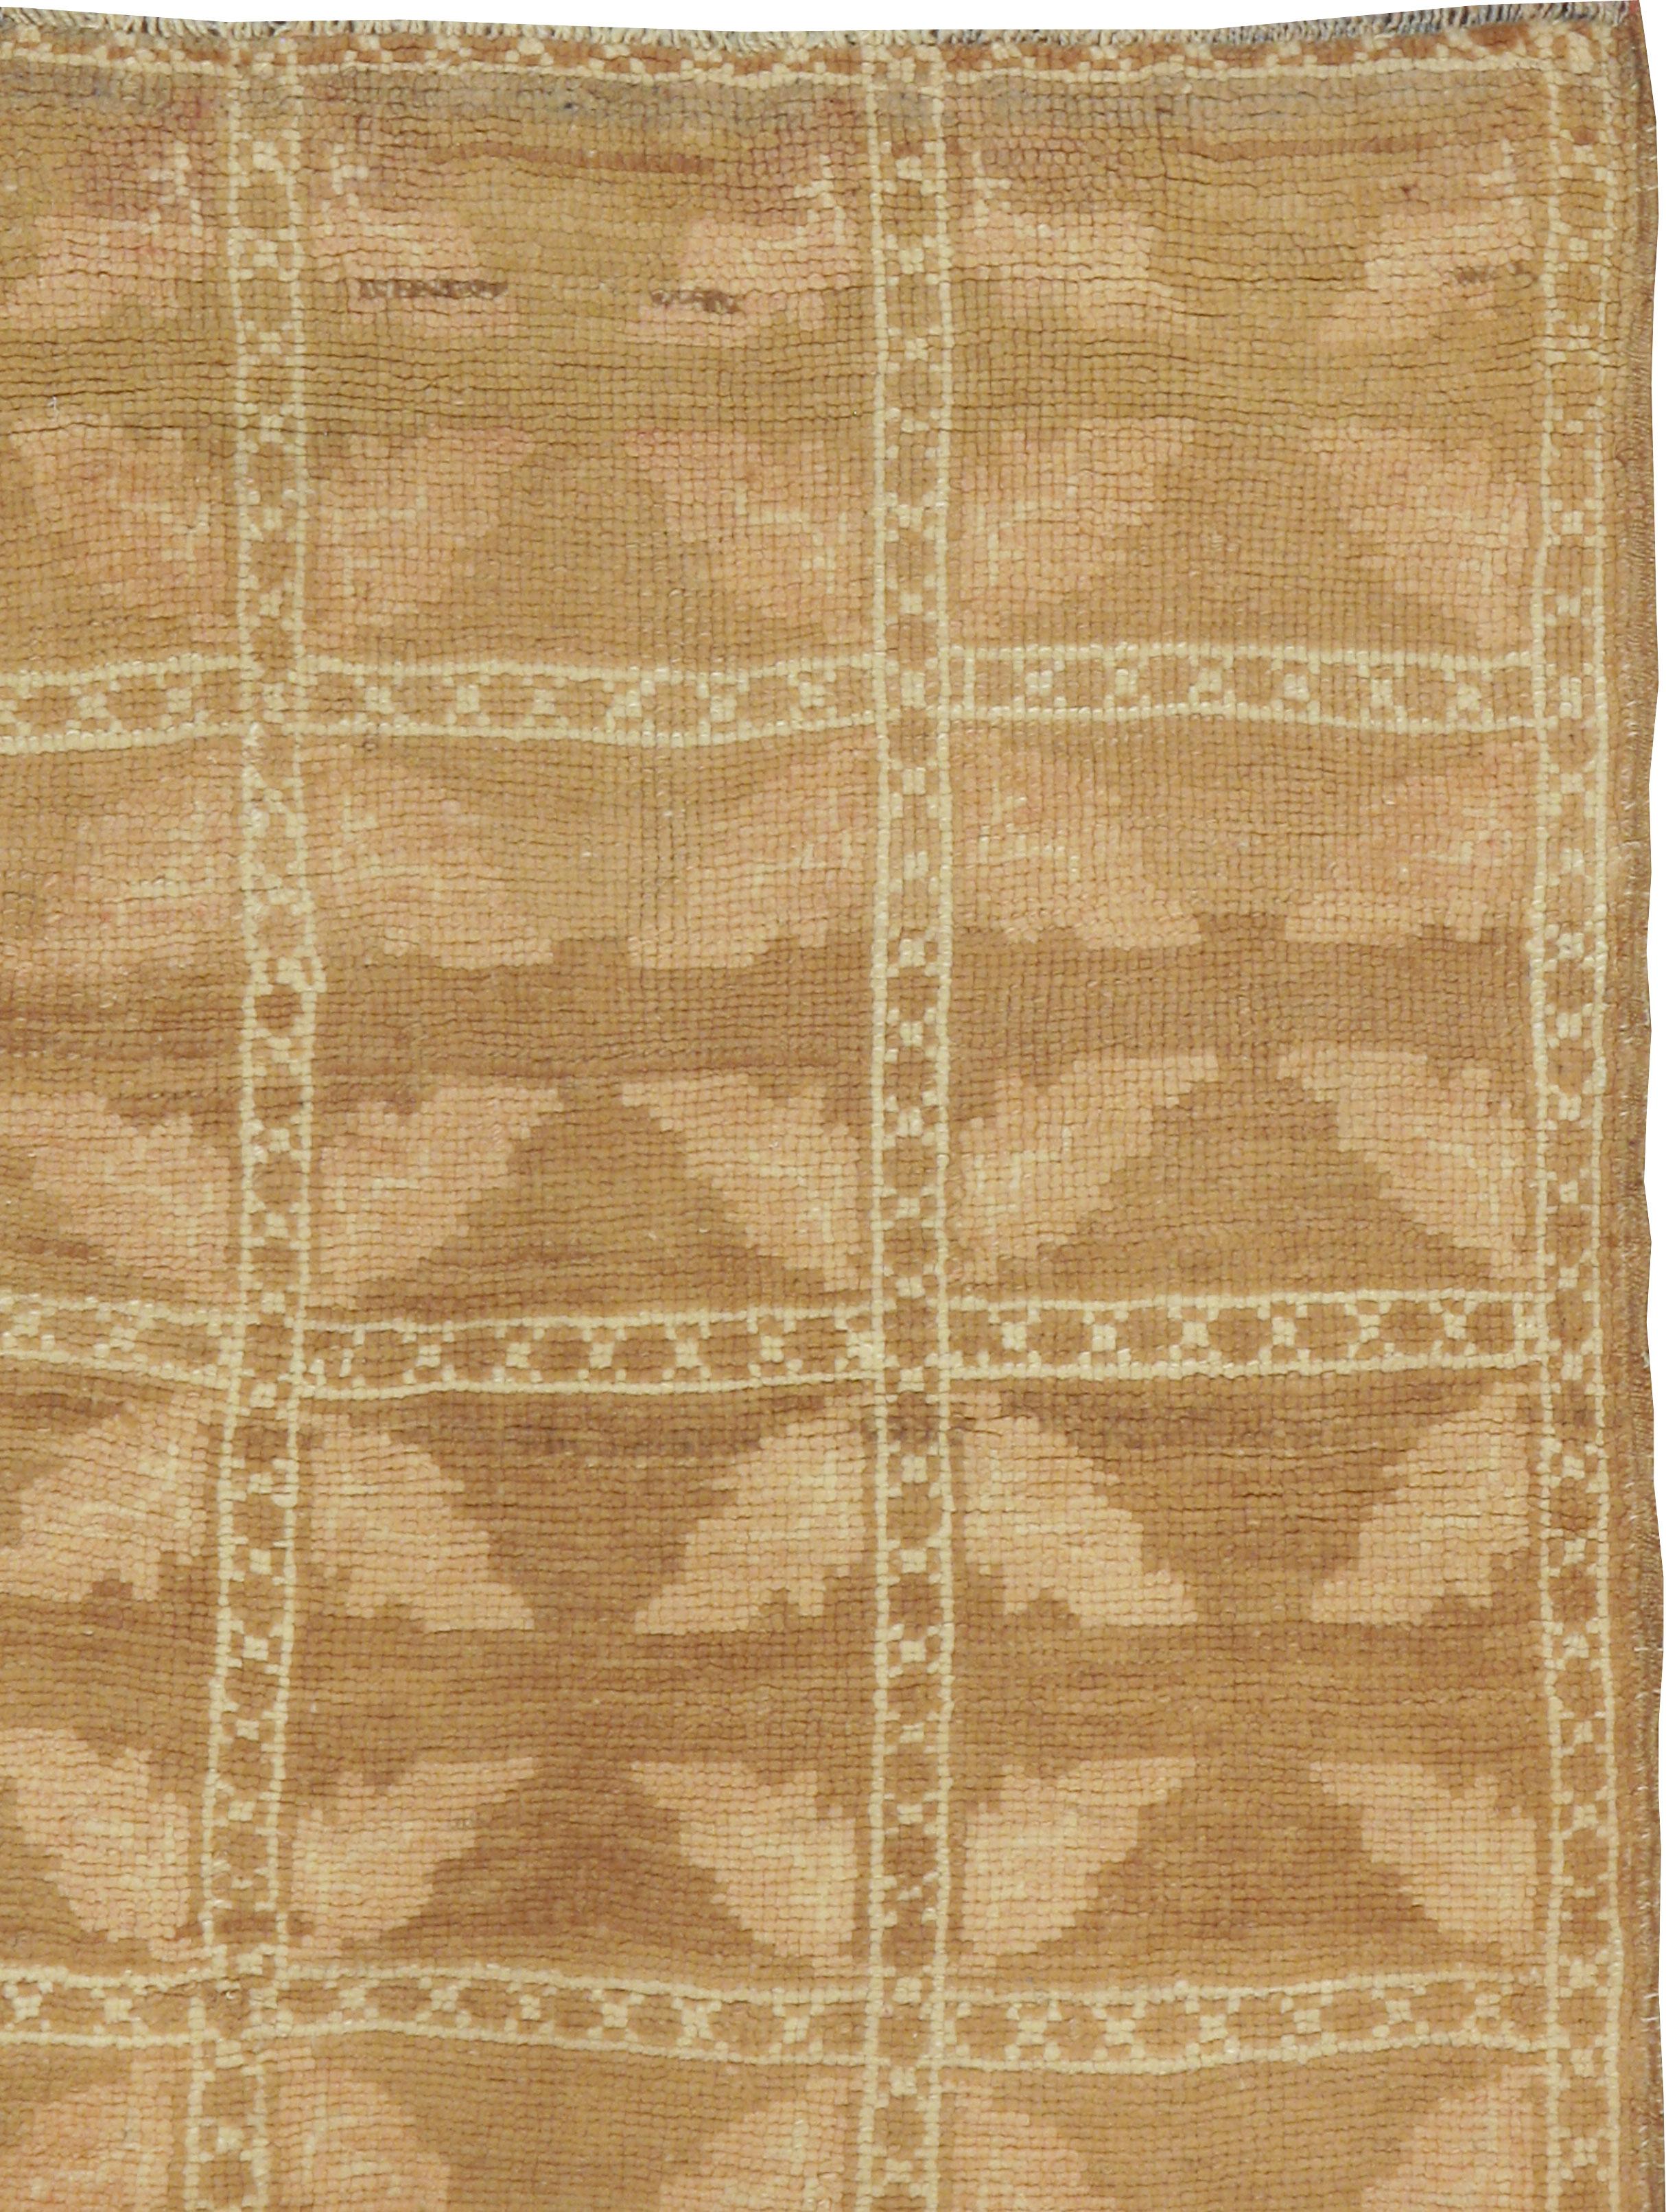 A vintage Turkish Anatolian rug from the mid-20th century. A square brown grid of five squares by eight displays a leafy Maltese cross in each panel. The colors are soft: rust-brown tan and old ivory. The skinny border is an extension of the